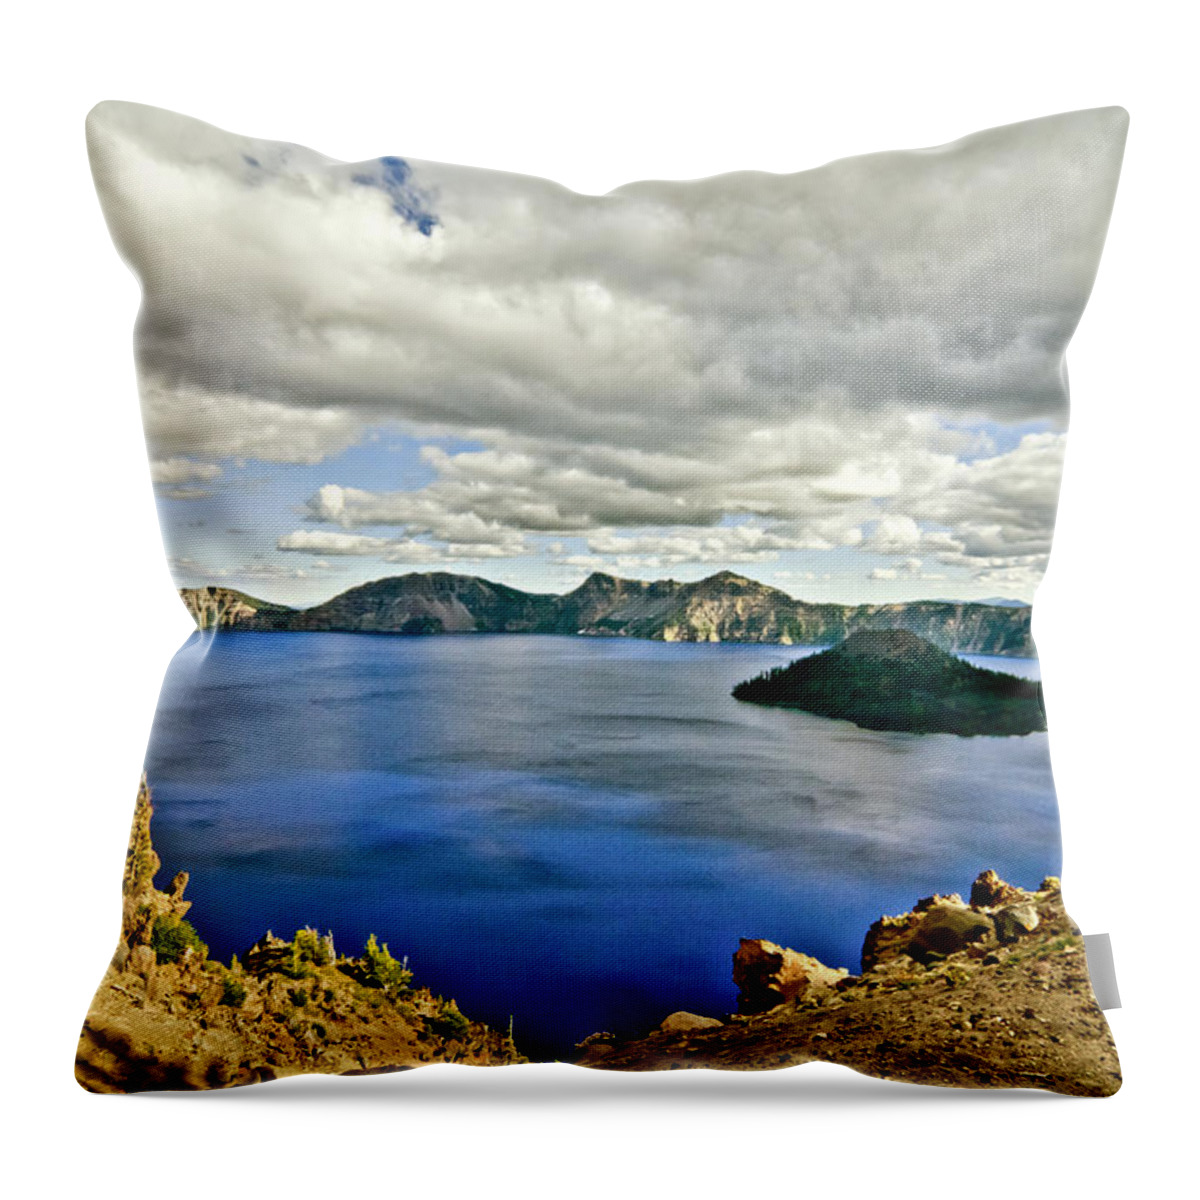 Crater Lake Throw Pillow featuring the photograph Crater Lake I by Albert Seger